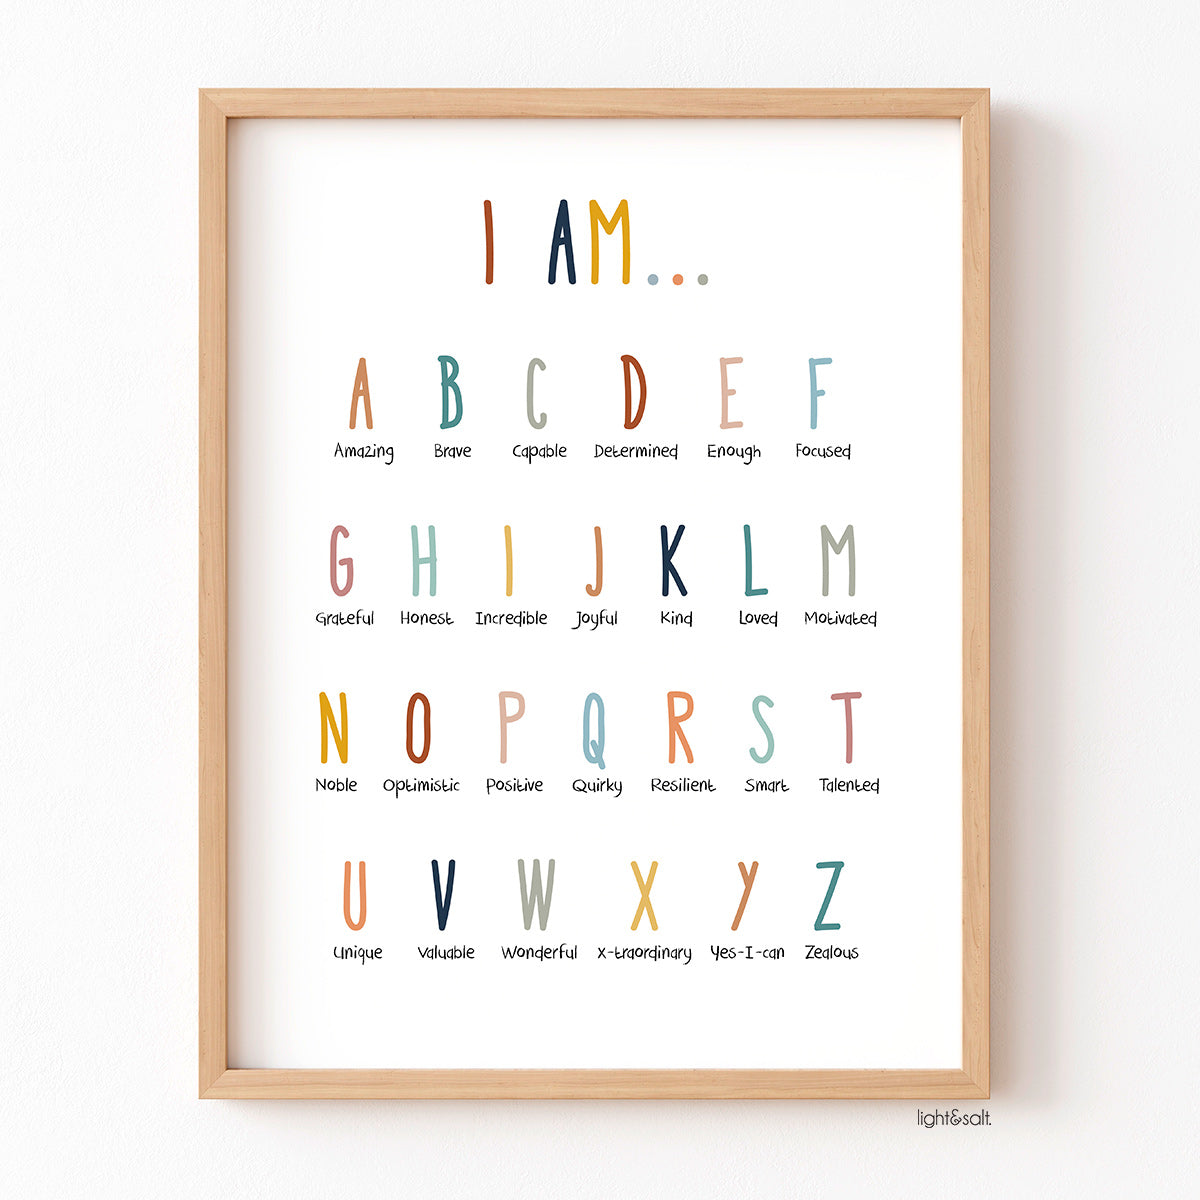 ABC affirmations poster